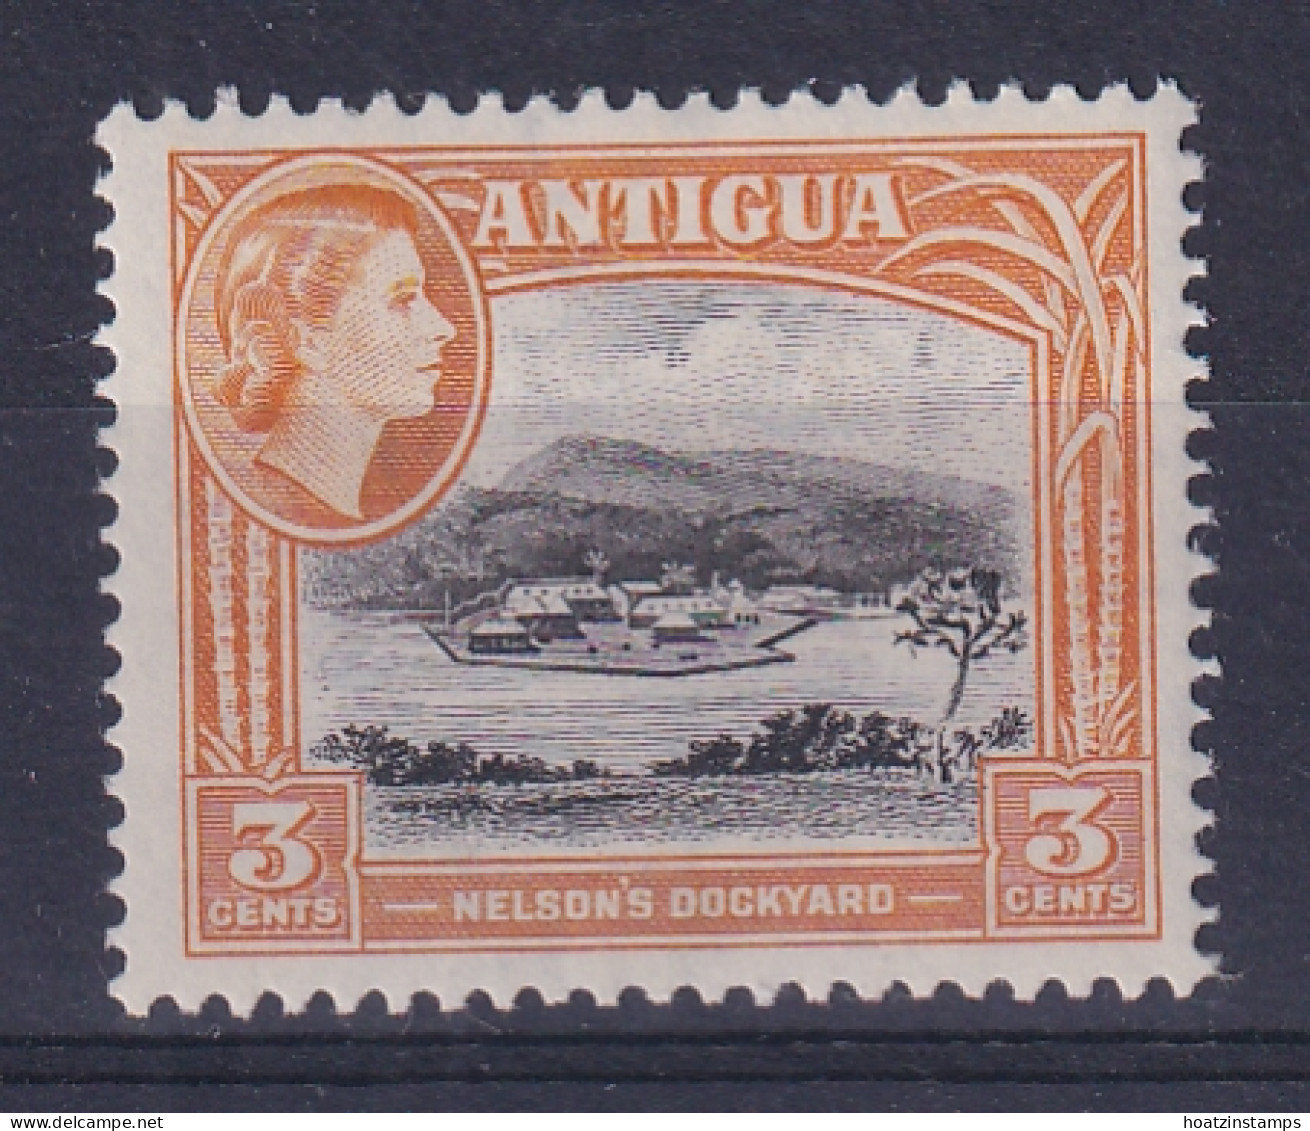 Antigua: 1963/65   QE II - Pictorial     SG152    3c   [Wmk: Block Crown CA]   MH - 1960-1981 Ministerial Government